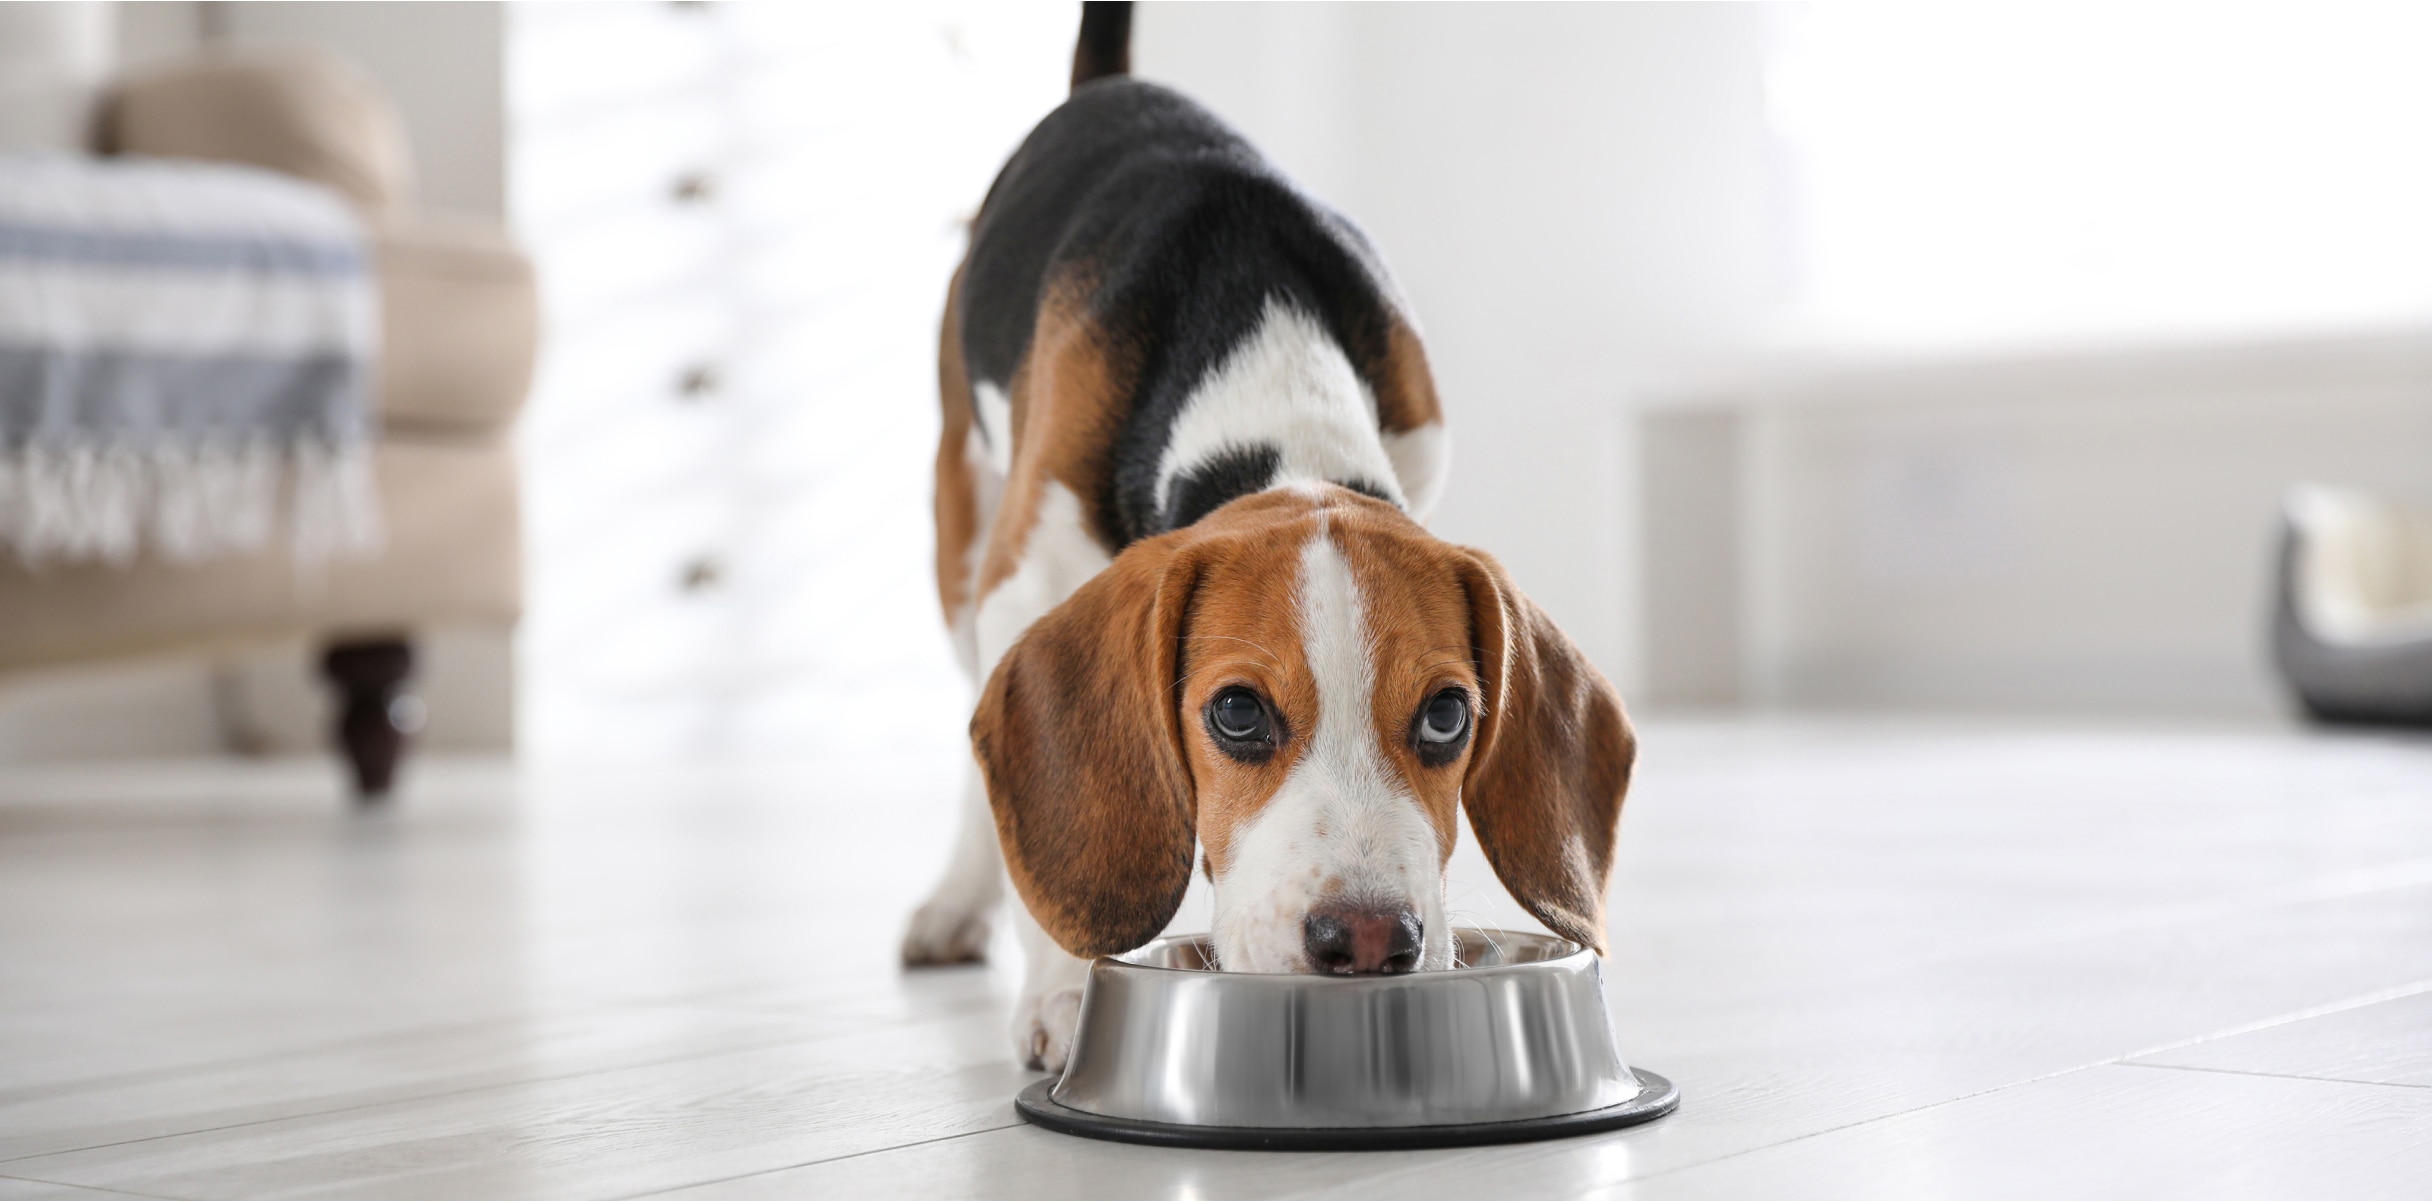 Ever wonder how pet food is made - A dog eating on his food bowl loooking up